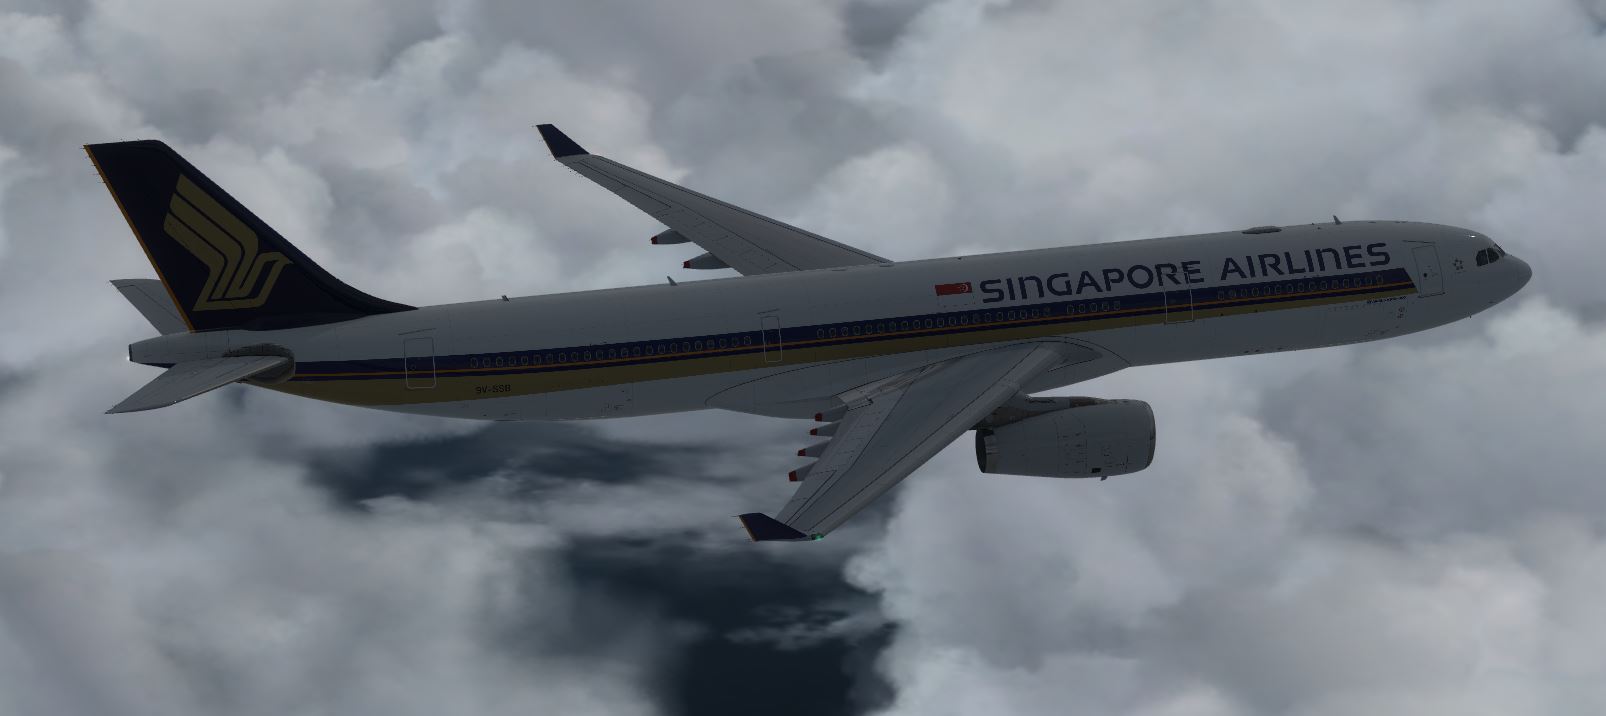 AS A330 Singapore Airlines-9605 